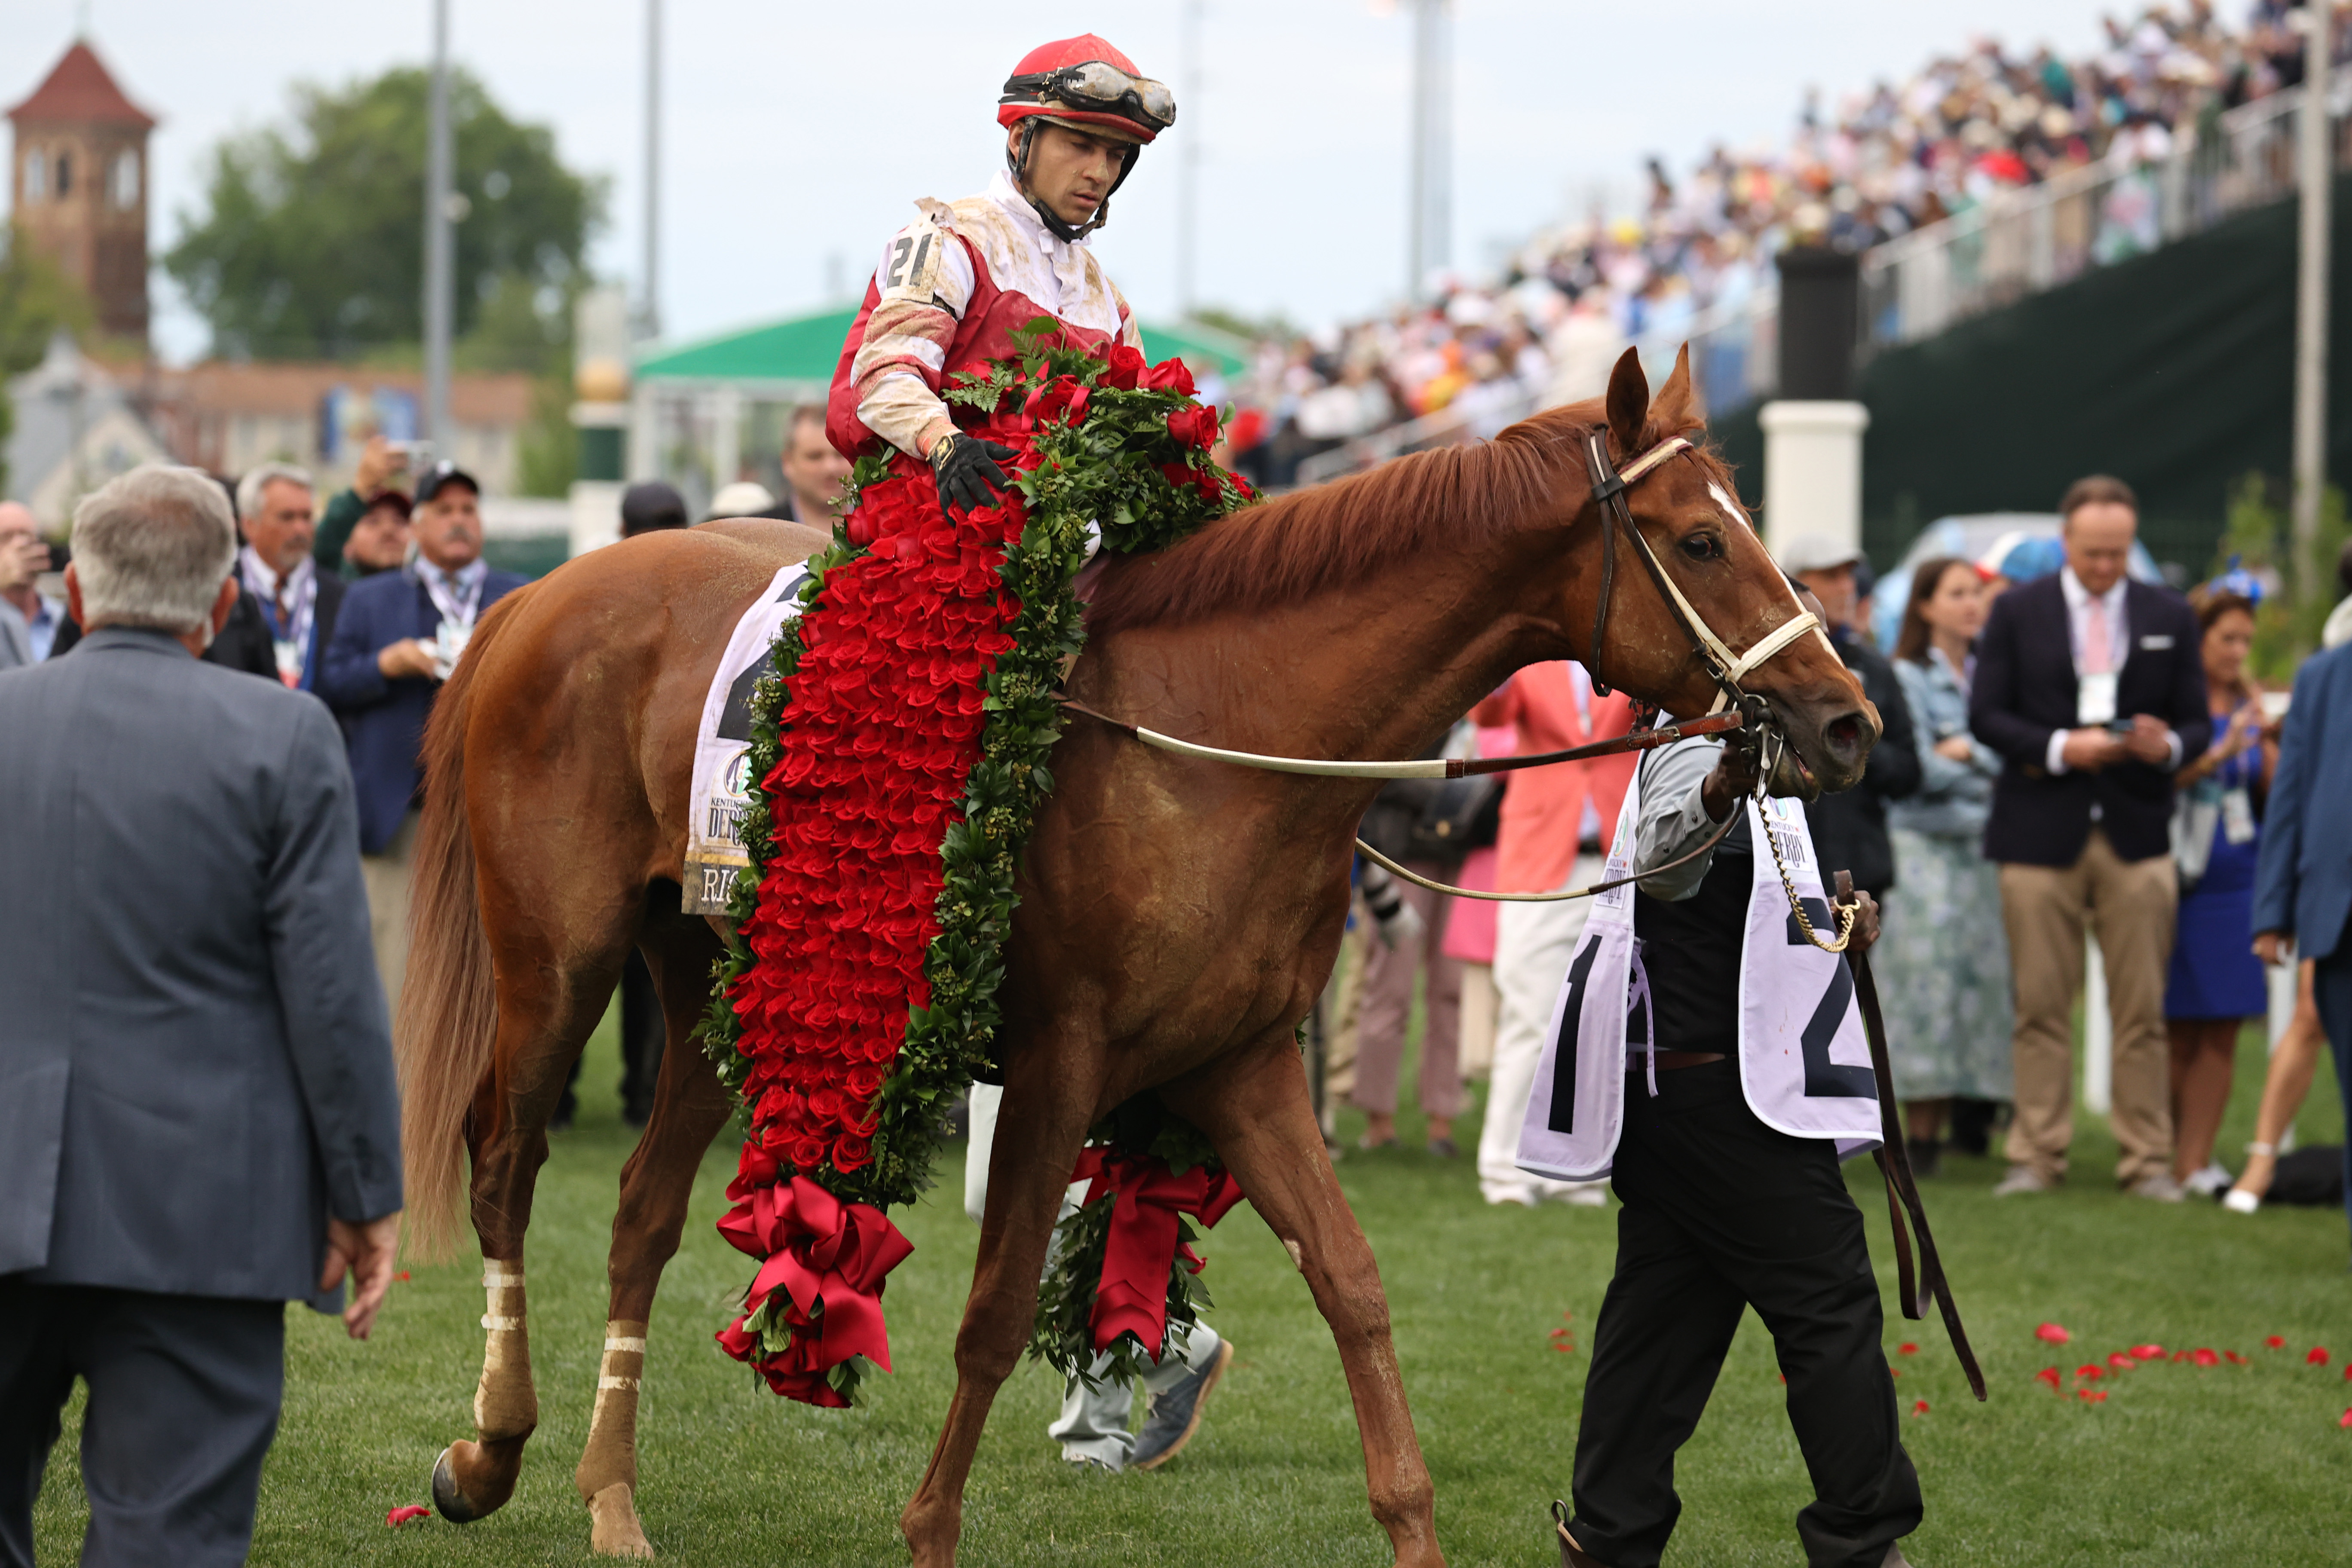 Jockey Sonny Leon aboard Rich Strike is paraded in the winner’s circle after winning the148th running of the Kentucky Derby on May 7th, 2022, at Churchill Downs in Louisville, Kentucky.